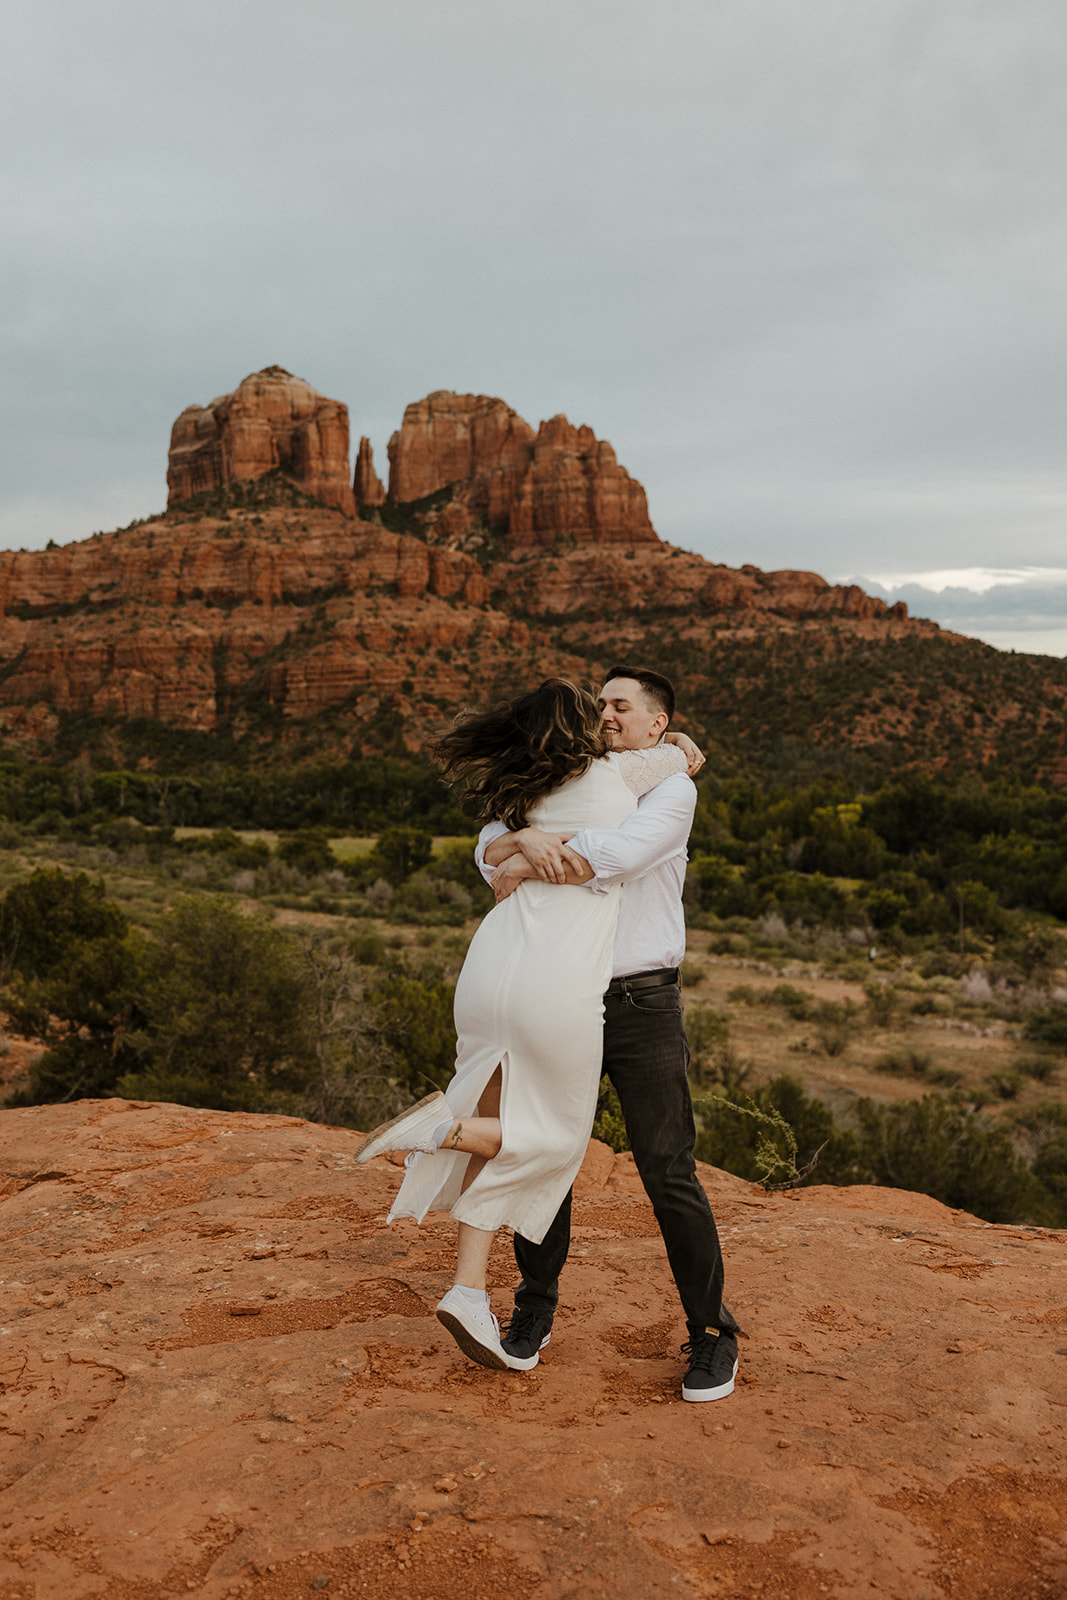 Stunning couple pose together during their beautiful Sedona engagement photoshoot with the Arizona nature in the background